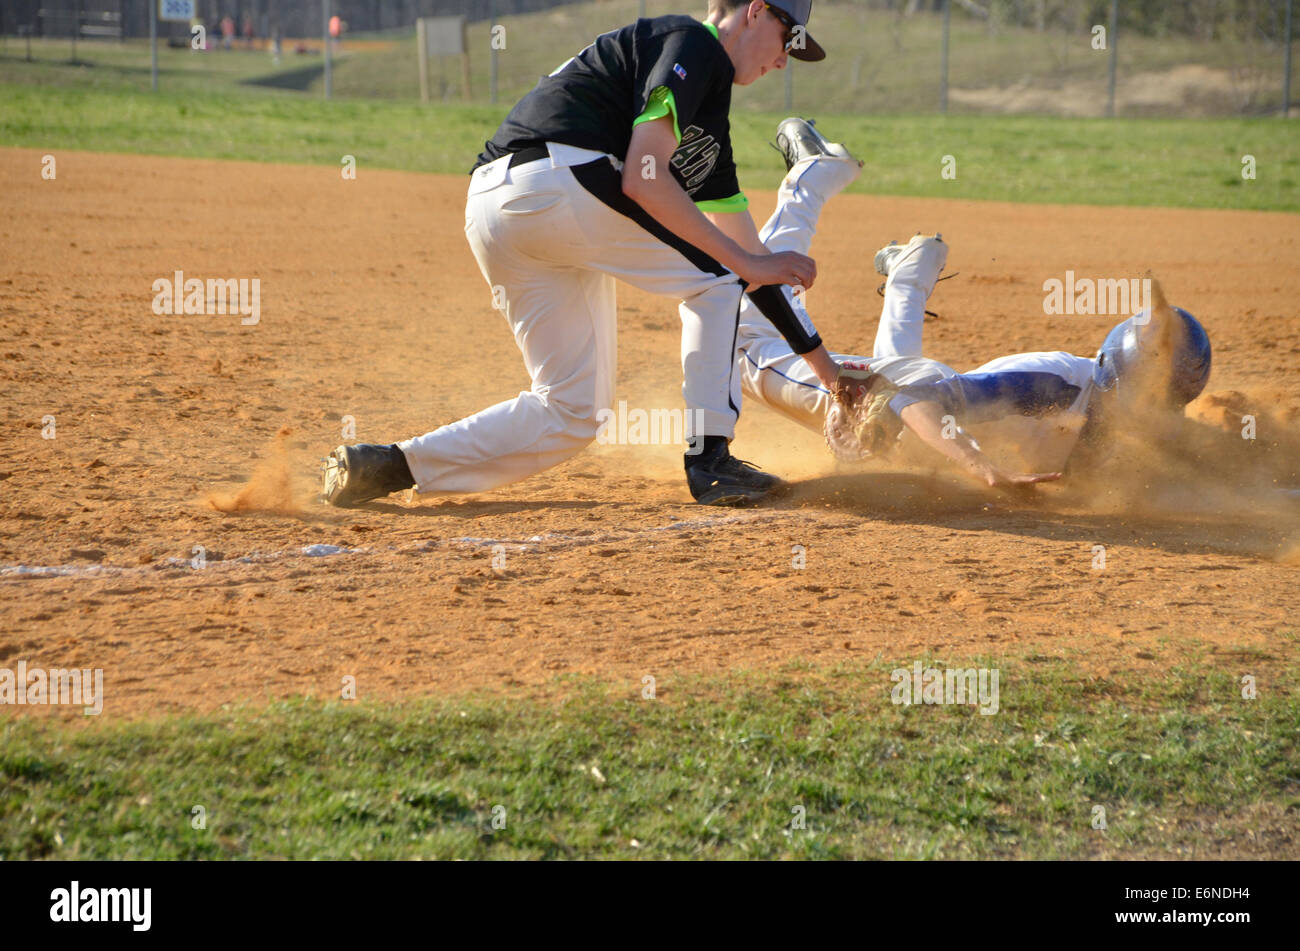 player slides into a base in a baseball game Stock Photo